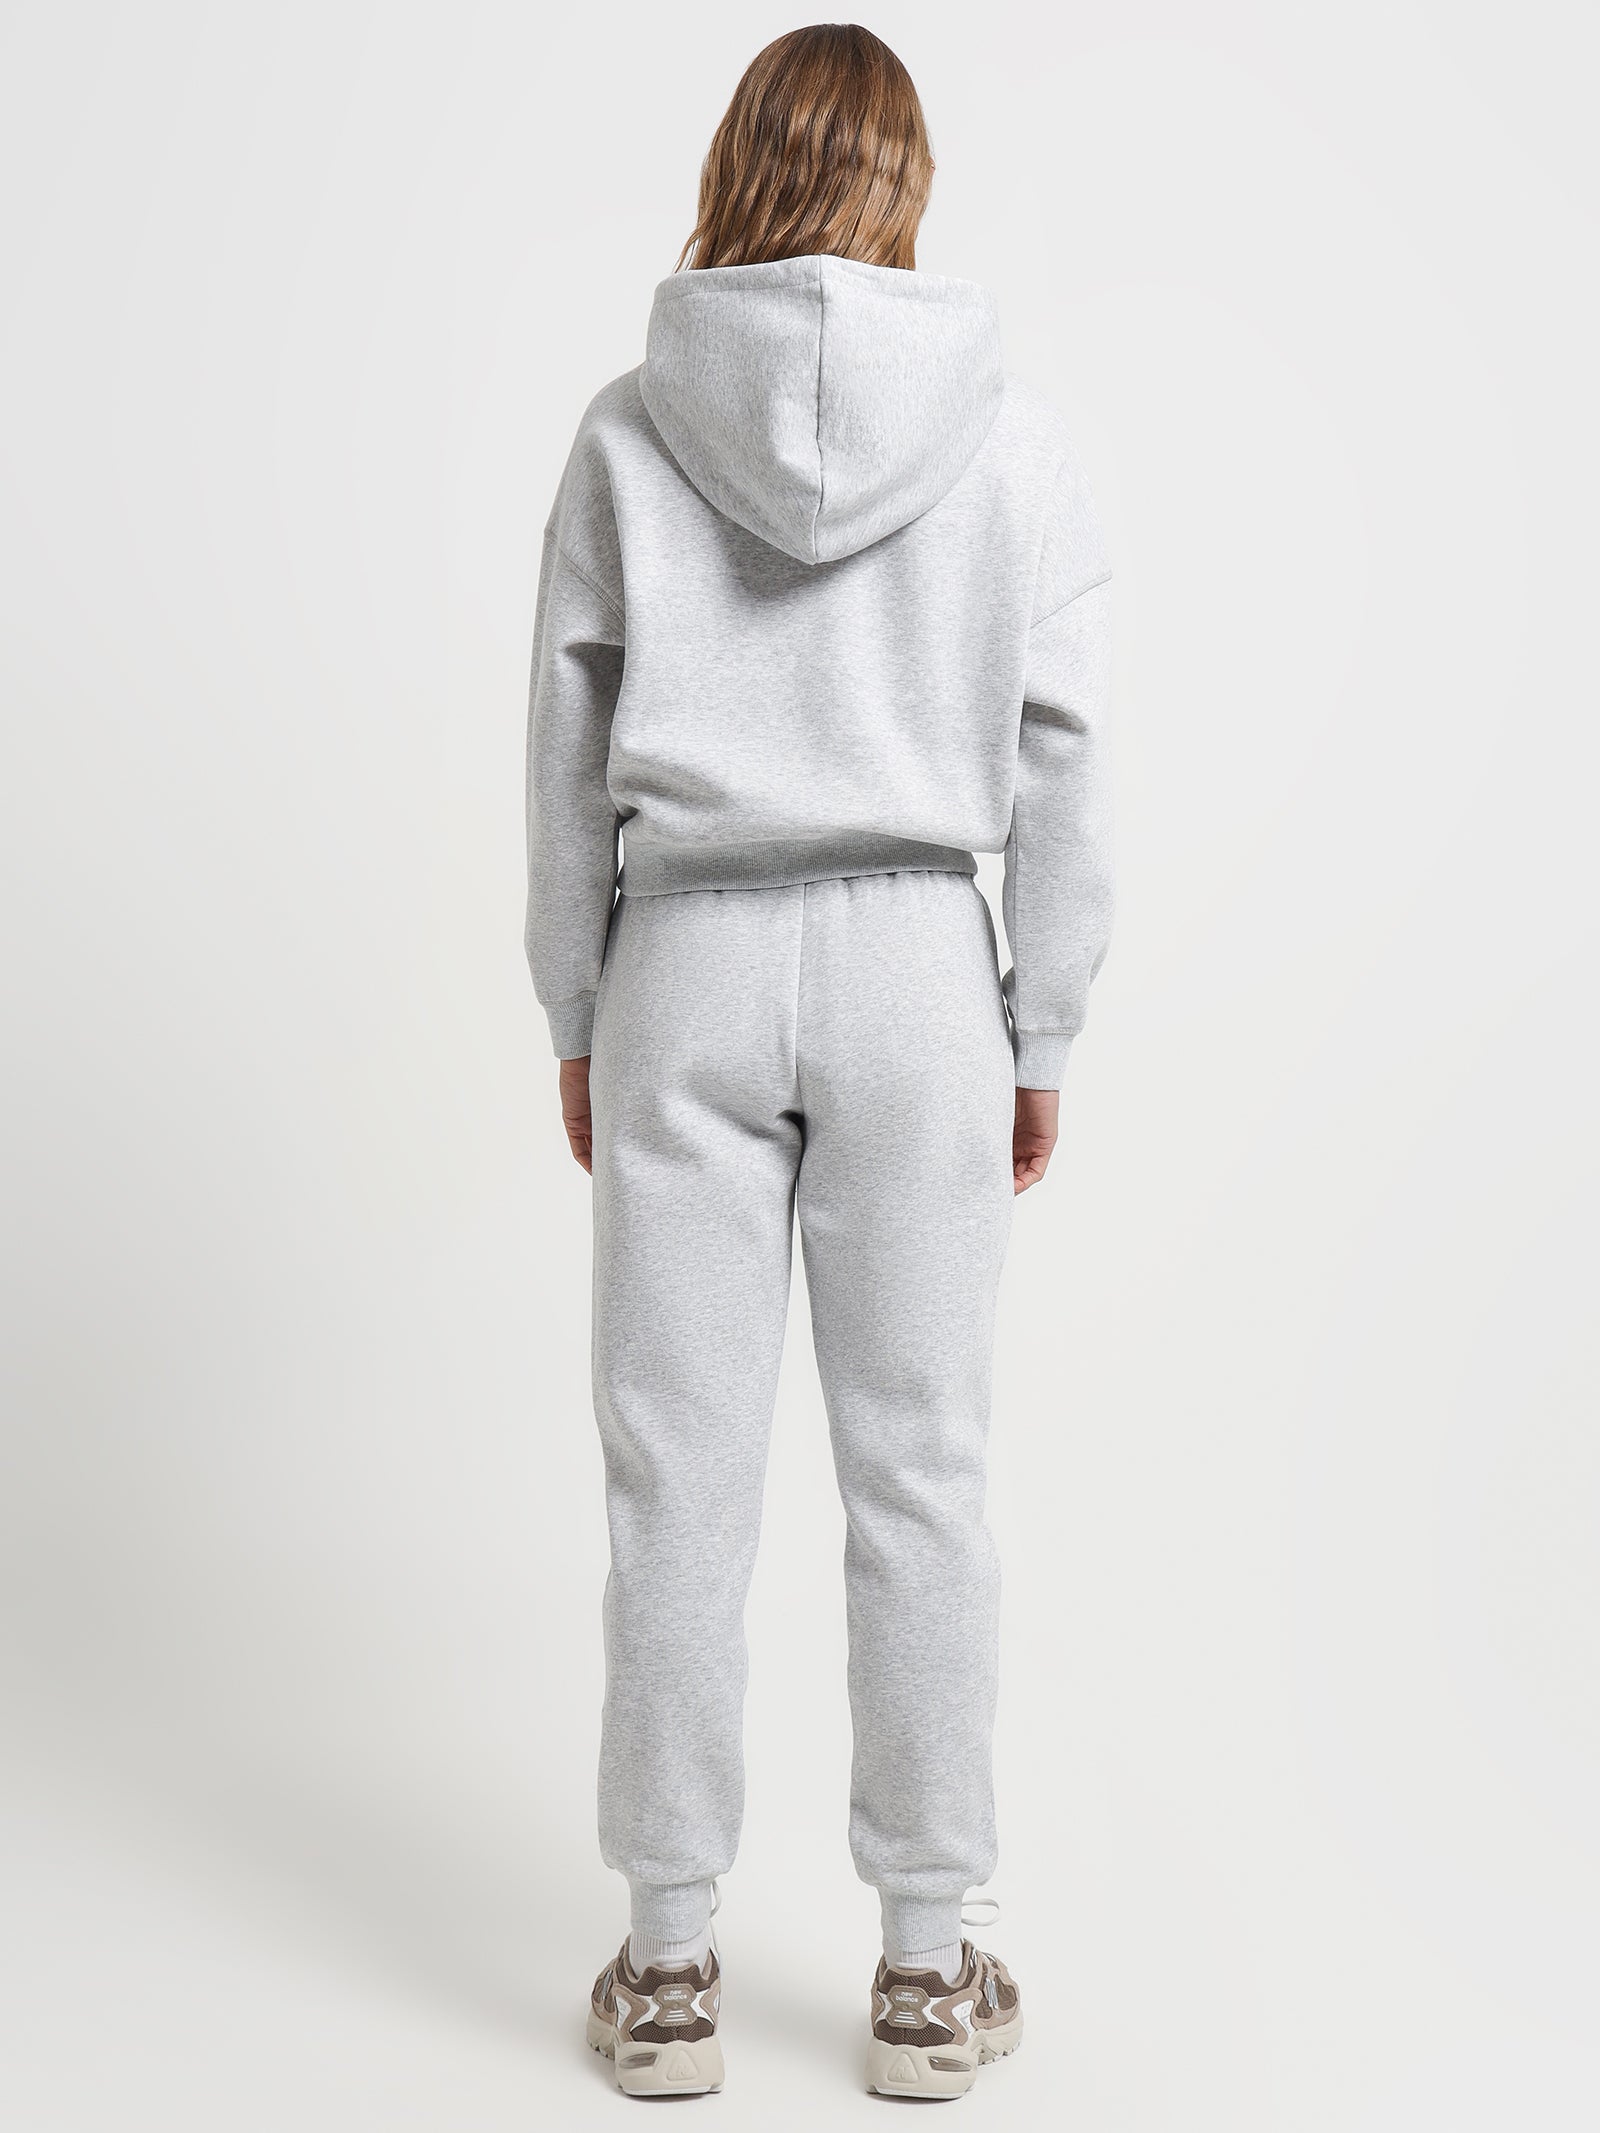 Carter Classic Trackpants in Grey Marle - Glue Store